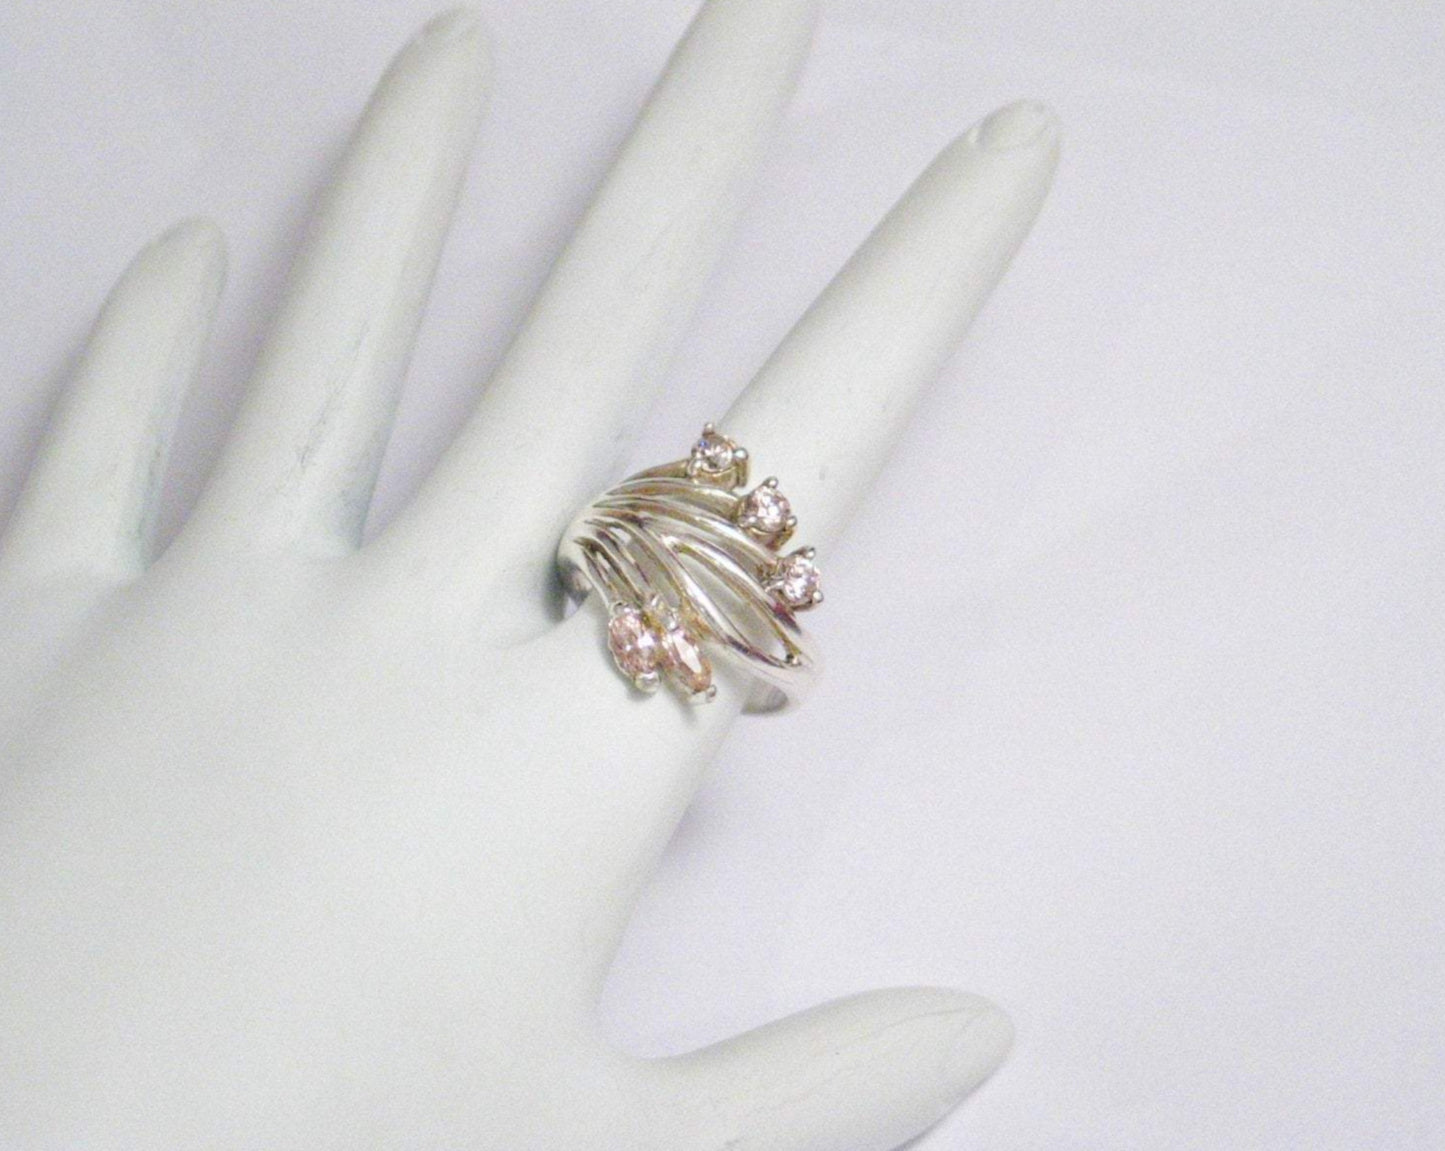 Statement Ring, Beautiful Wide Sterling Silver Pink Stone Spray Design Cocktail Ring